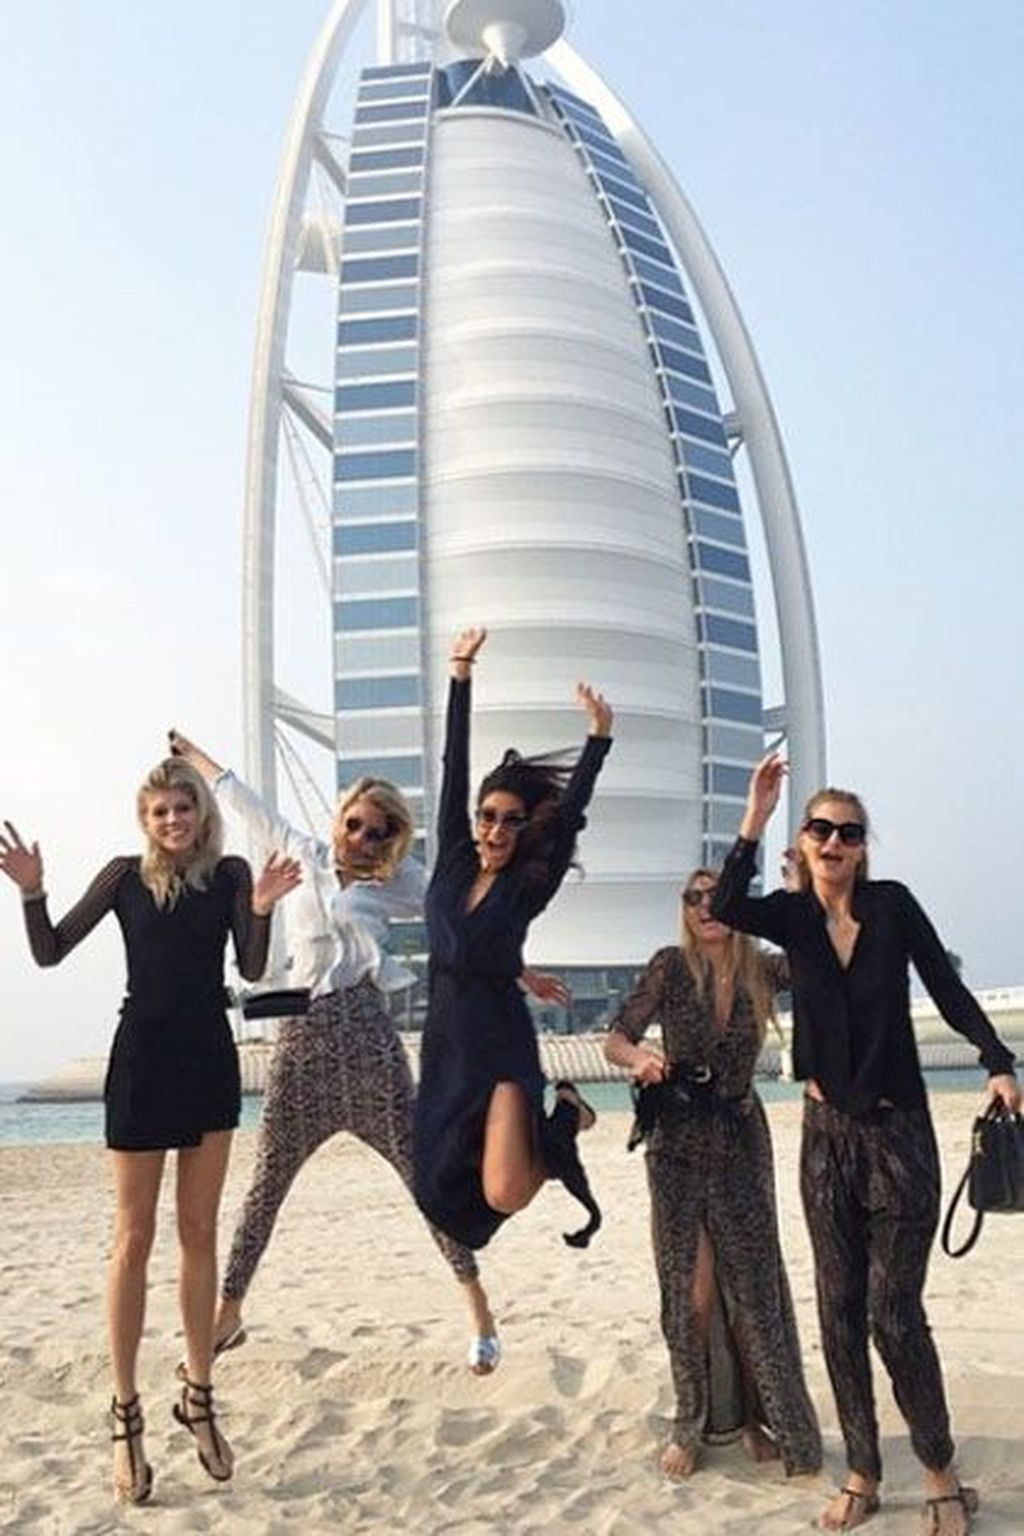 Awesome Photos Of Dubai To Make You Want To Visit It36